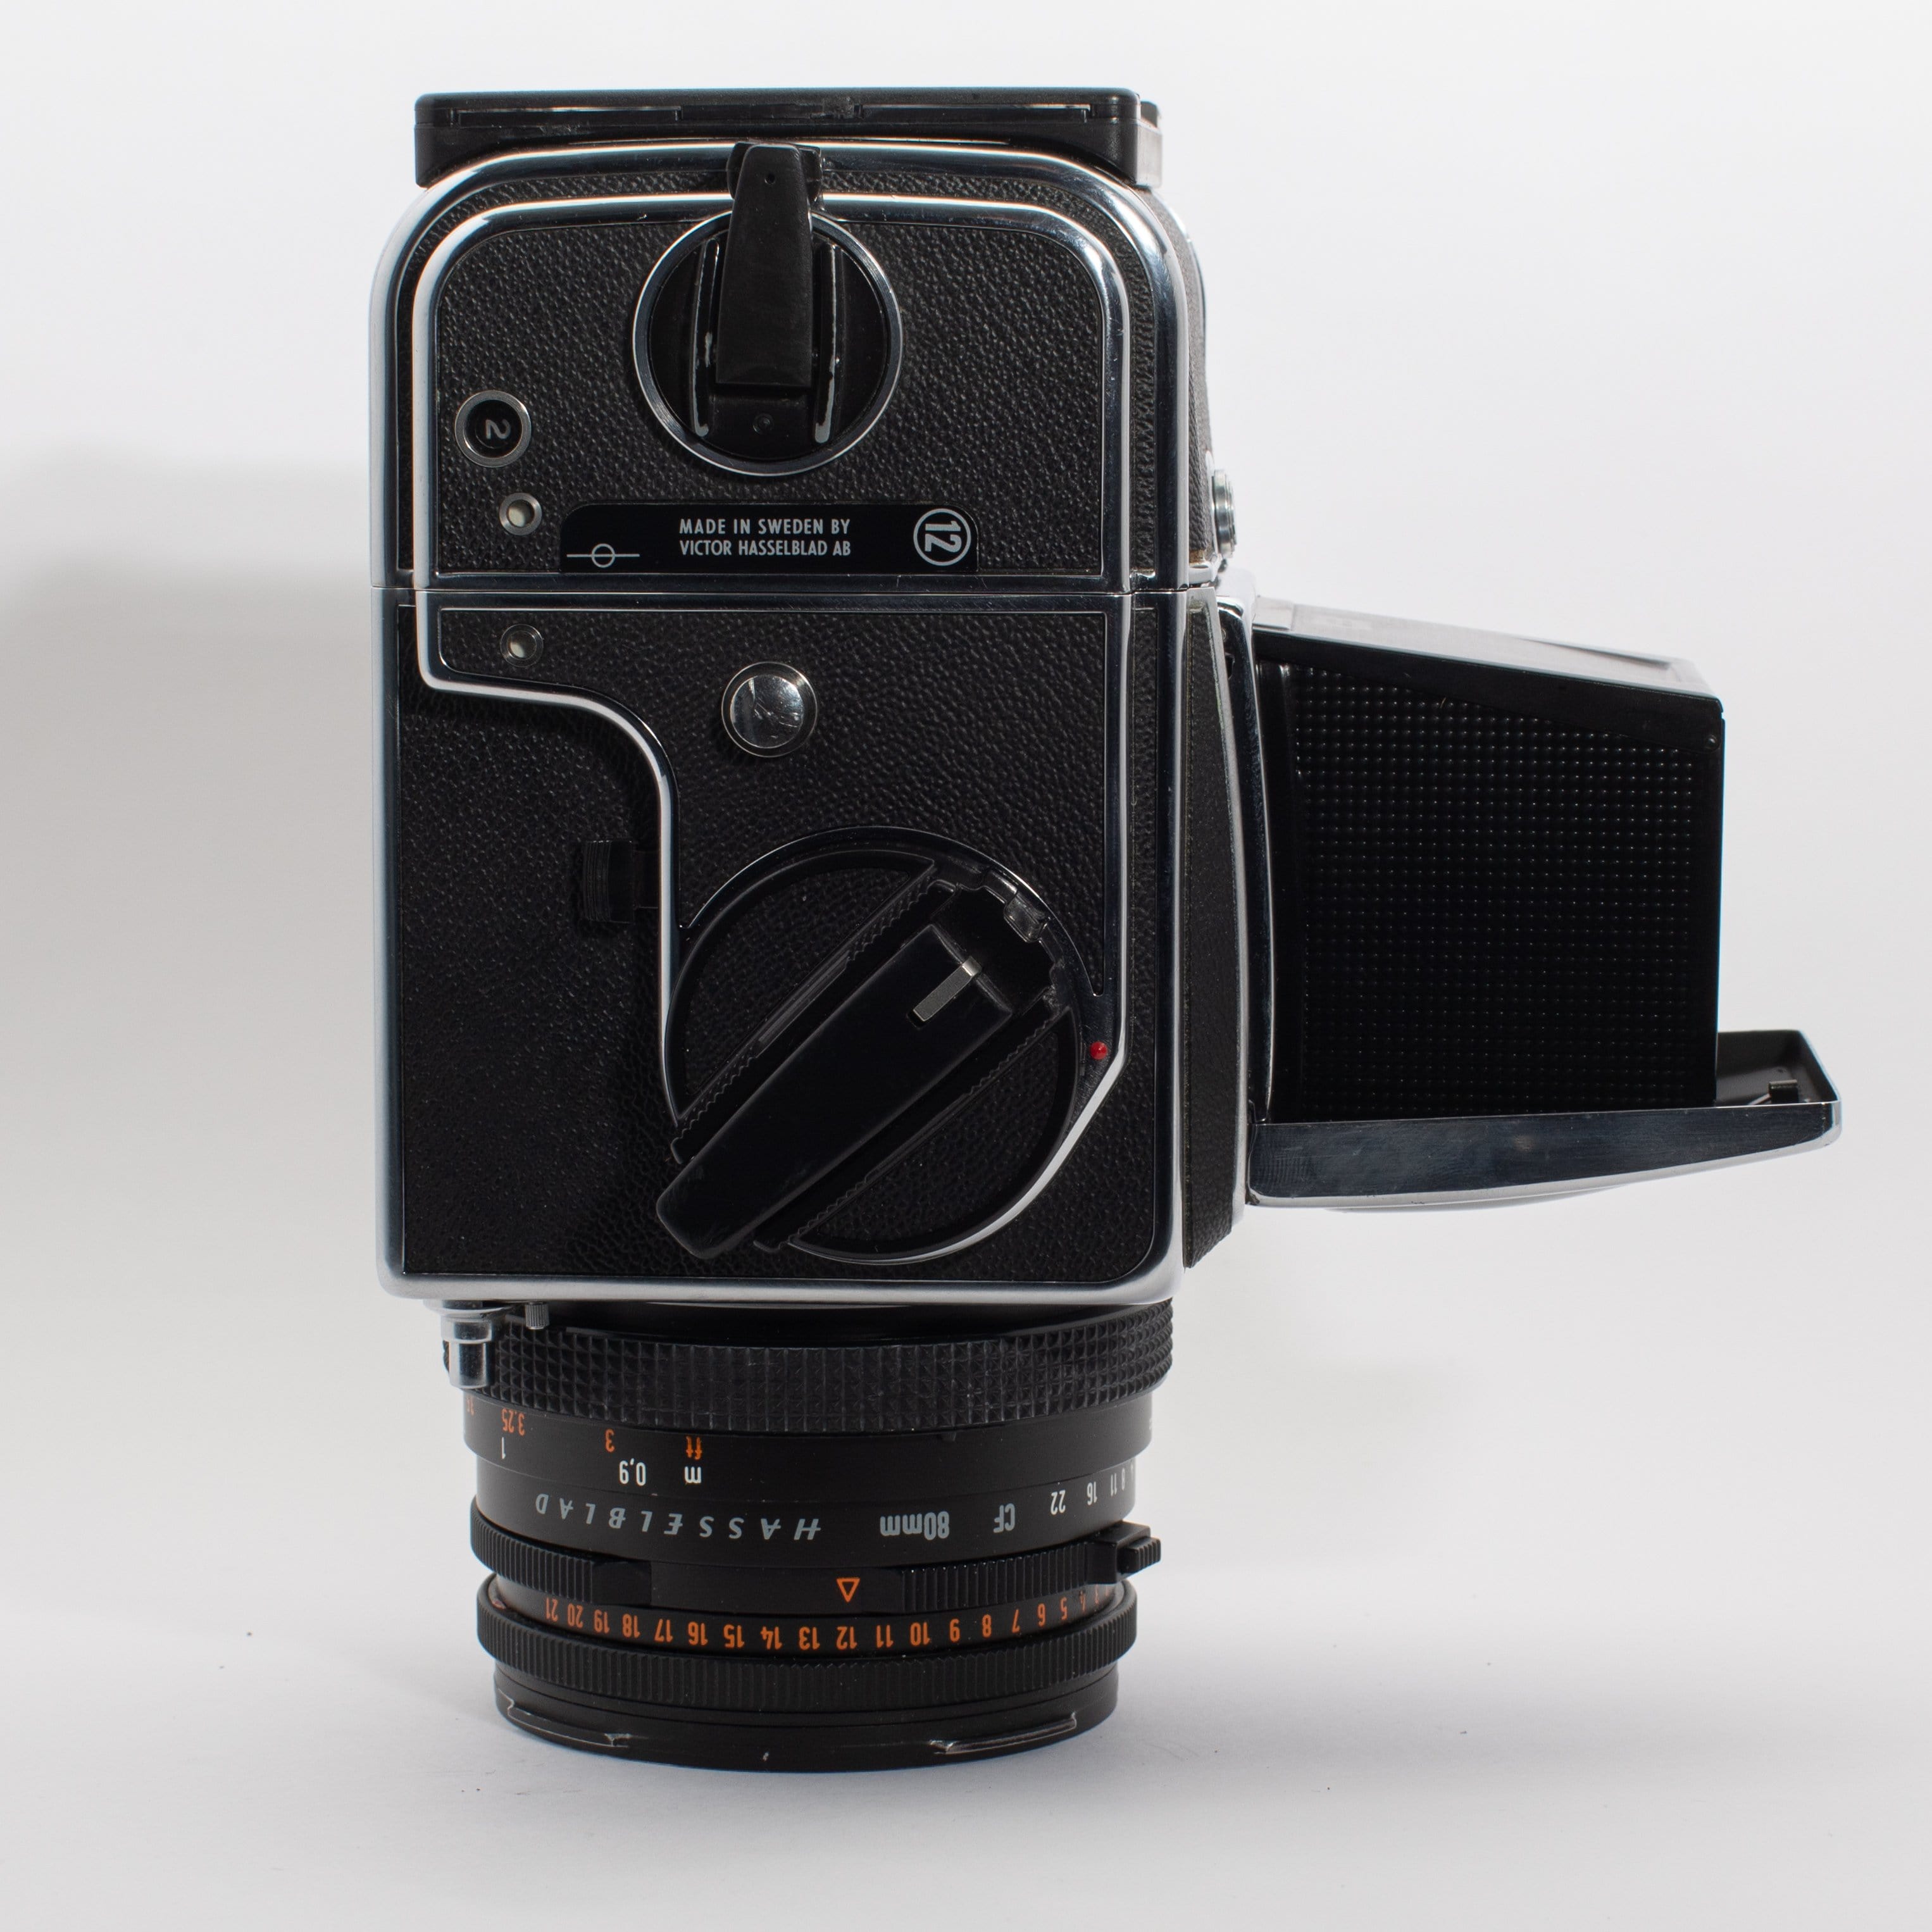 Hasselblad 500 C/M with Zeiss Planar T* 80mm f/2.8 CF Lens